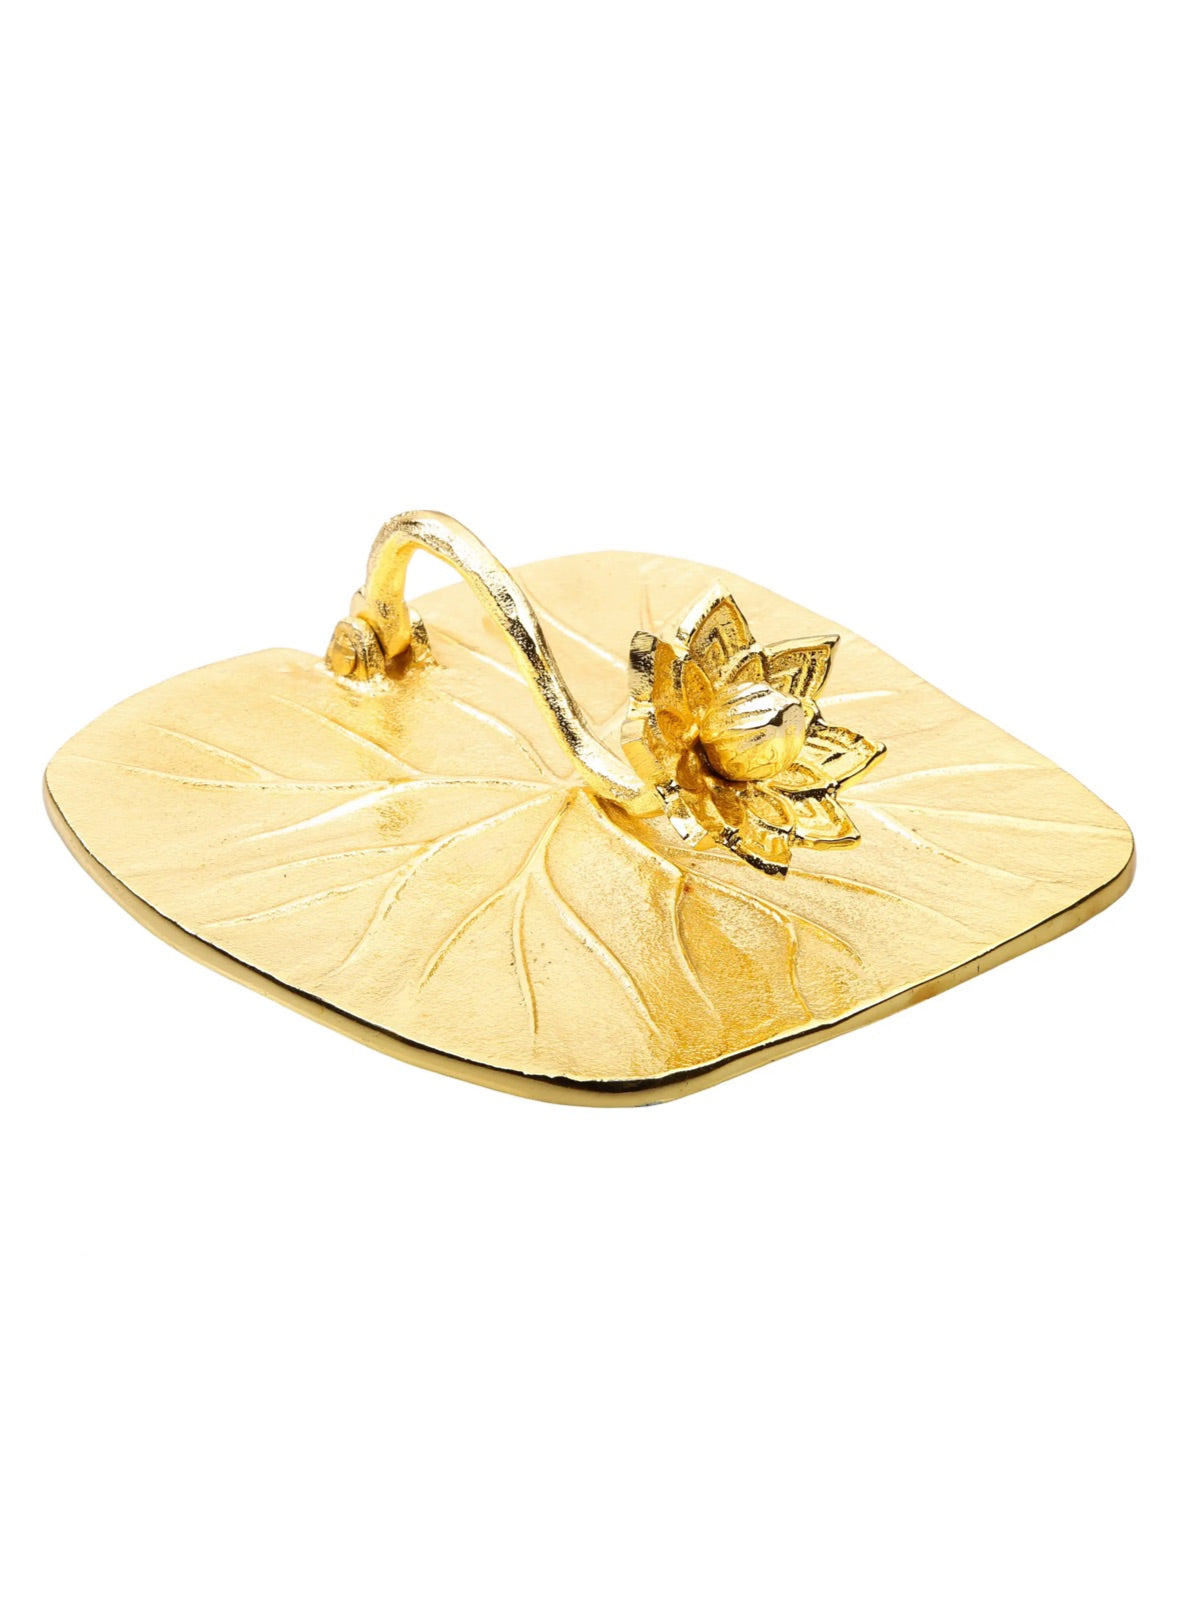 The sophistication of this 7in Squared napkin holder is shown in its stainless steel gold color and beautiful lotus flower design. The veins travelling through the base of the napkin holder provides it with an authentic nature style. Sold by KYA Home Decor